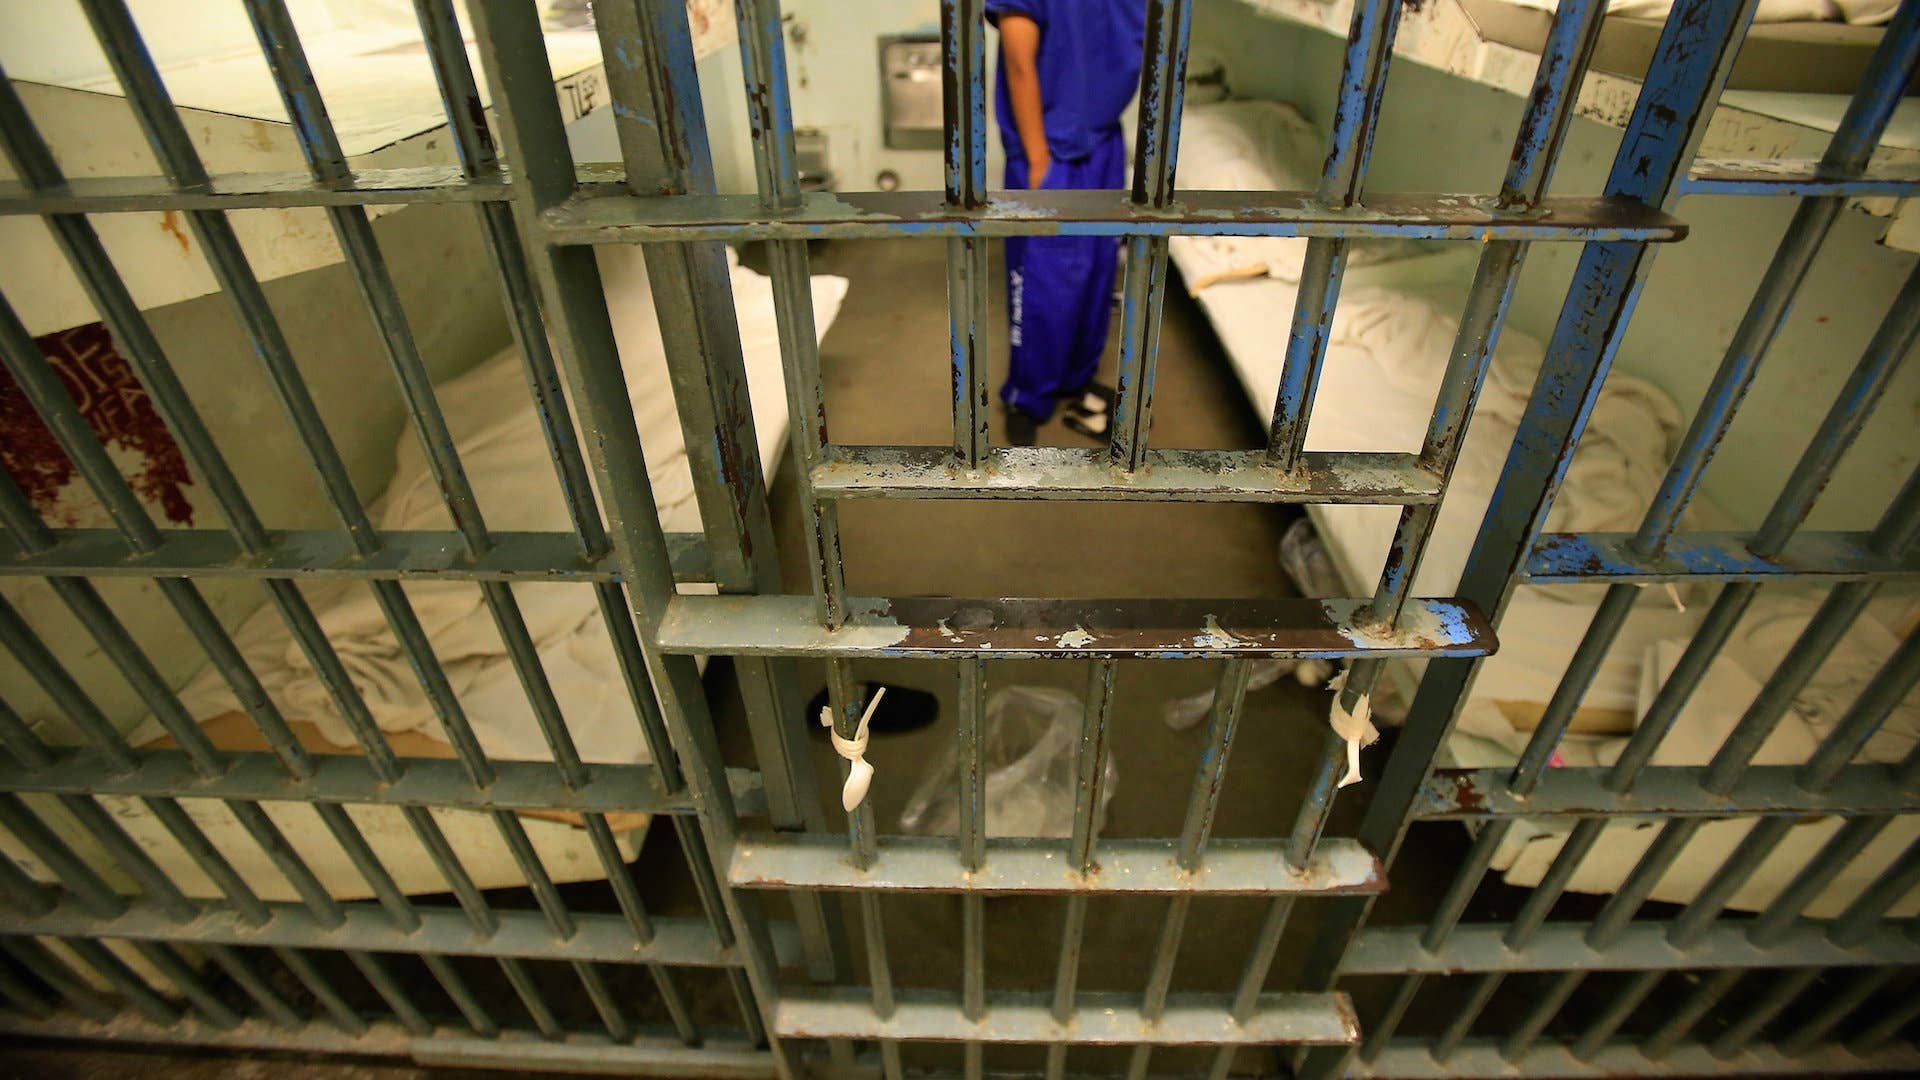 An inmate in a six bunk cell inside the Men's Central Jail